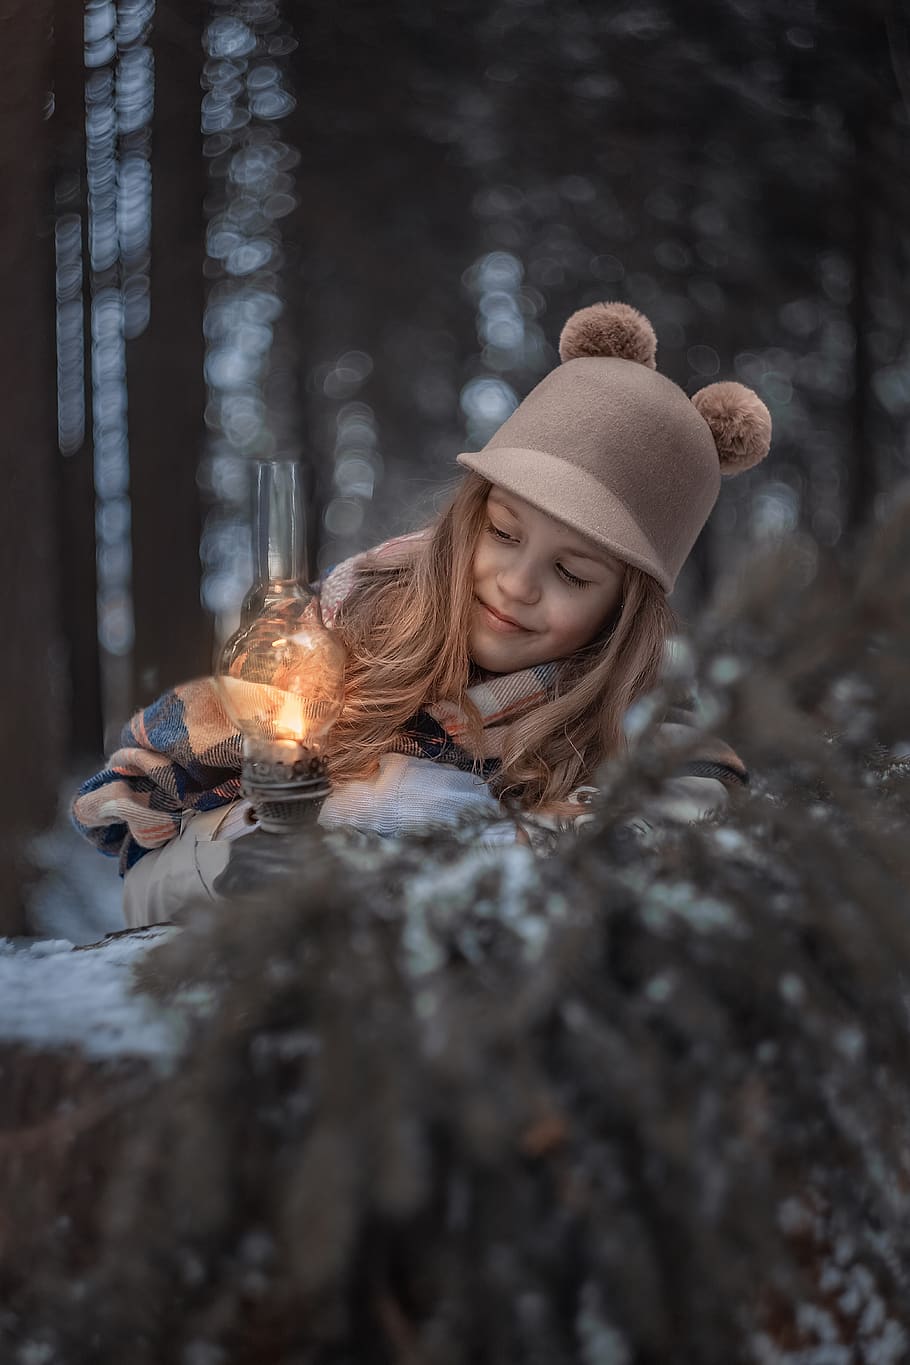 girl, baby, forest, lamp, stump, nature, childhood, kids, happy, atmosphere